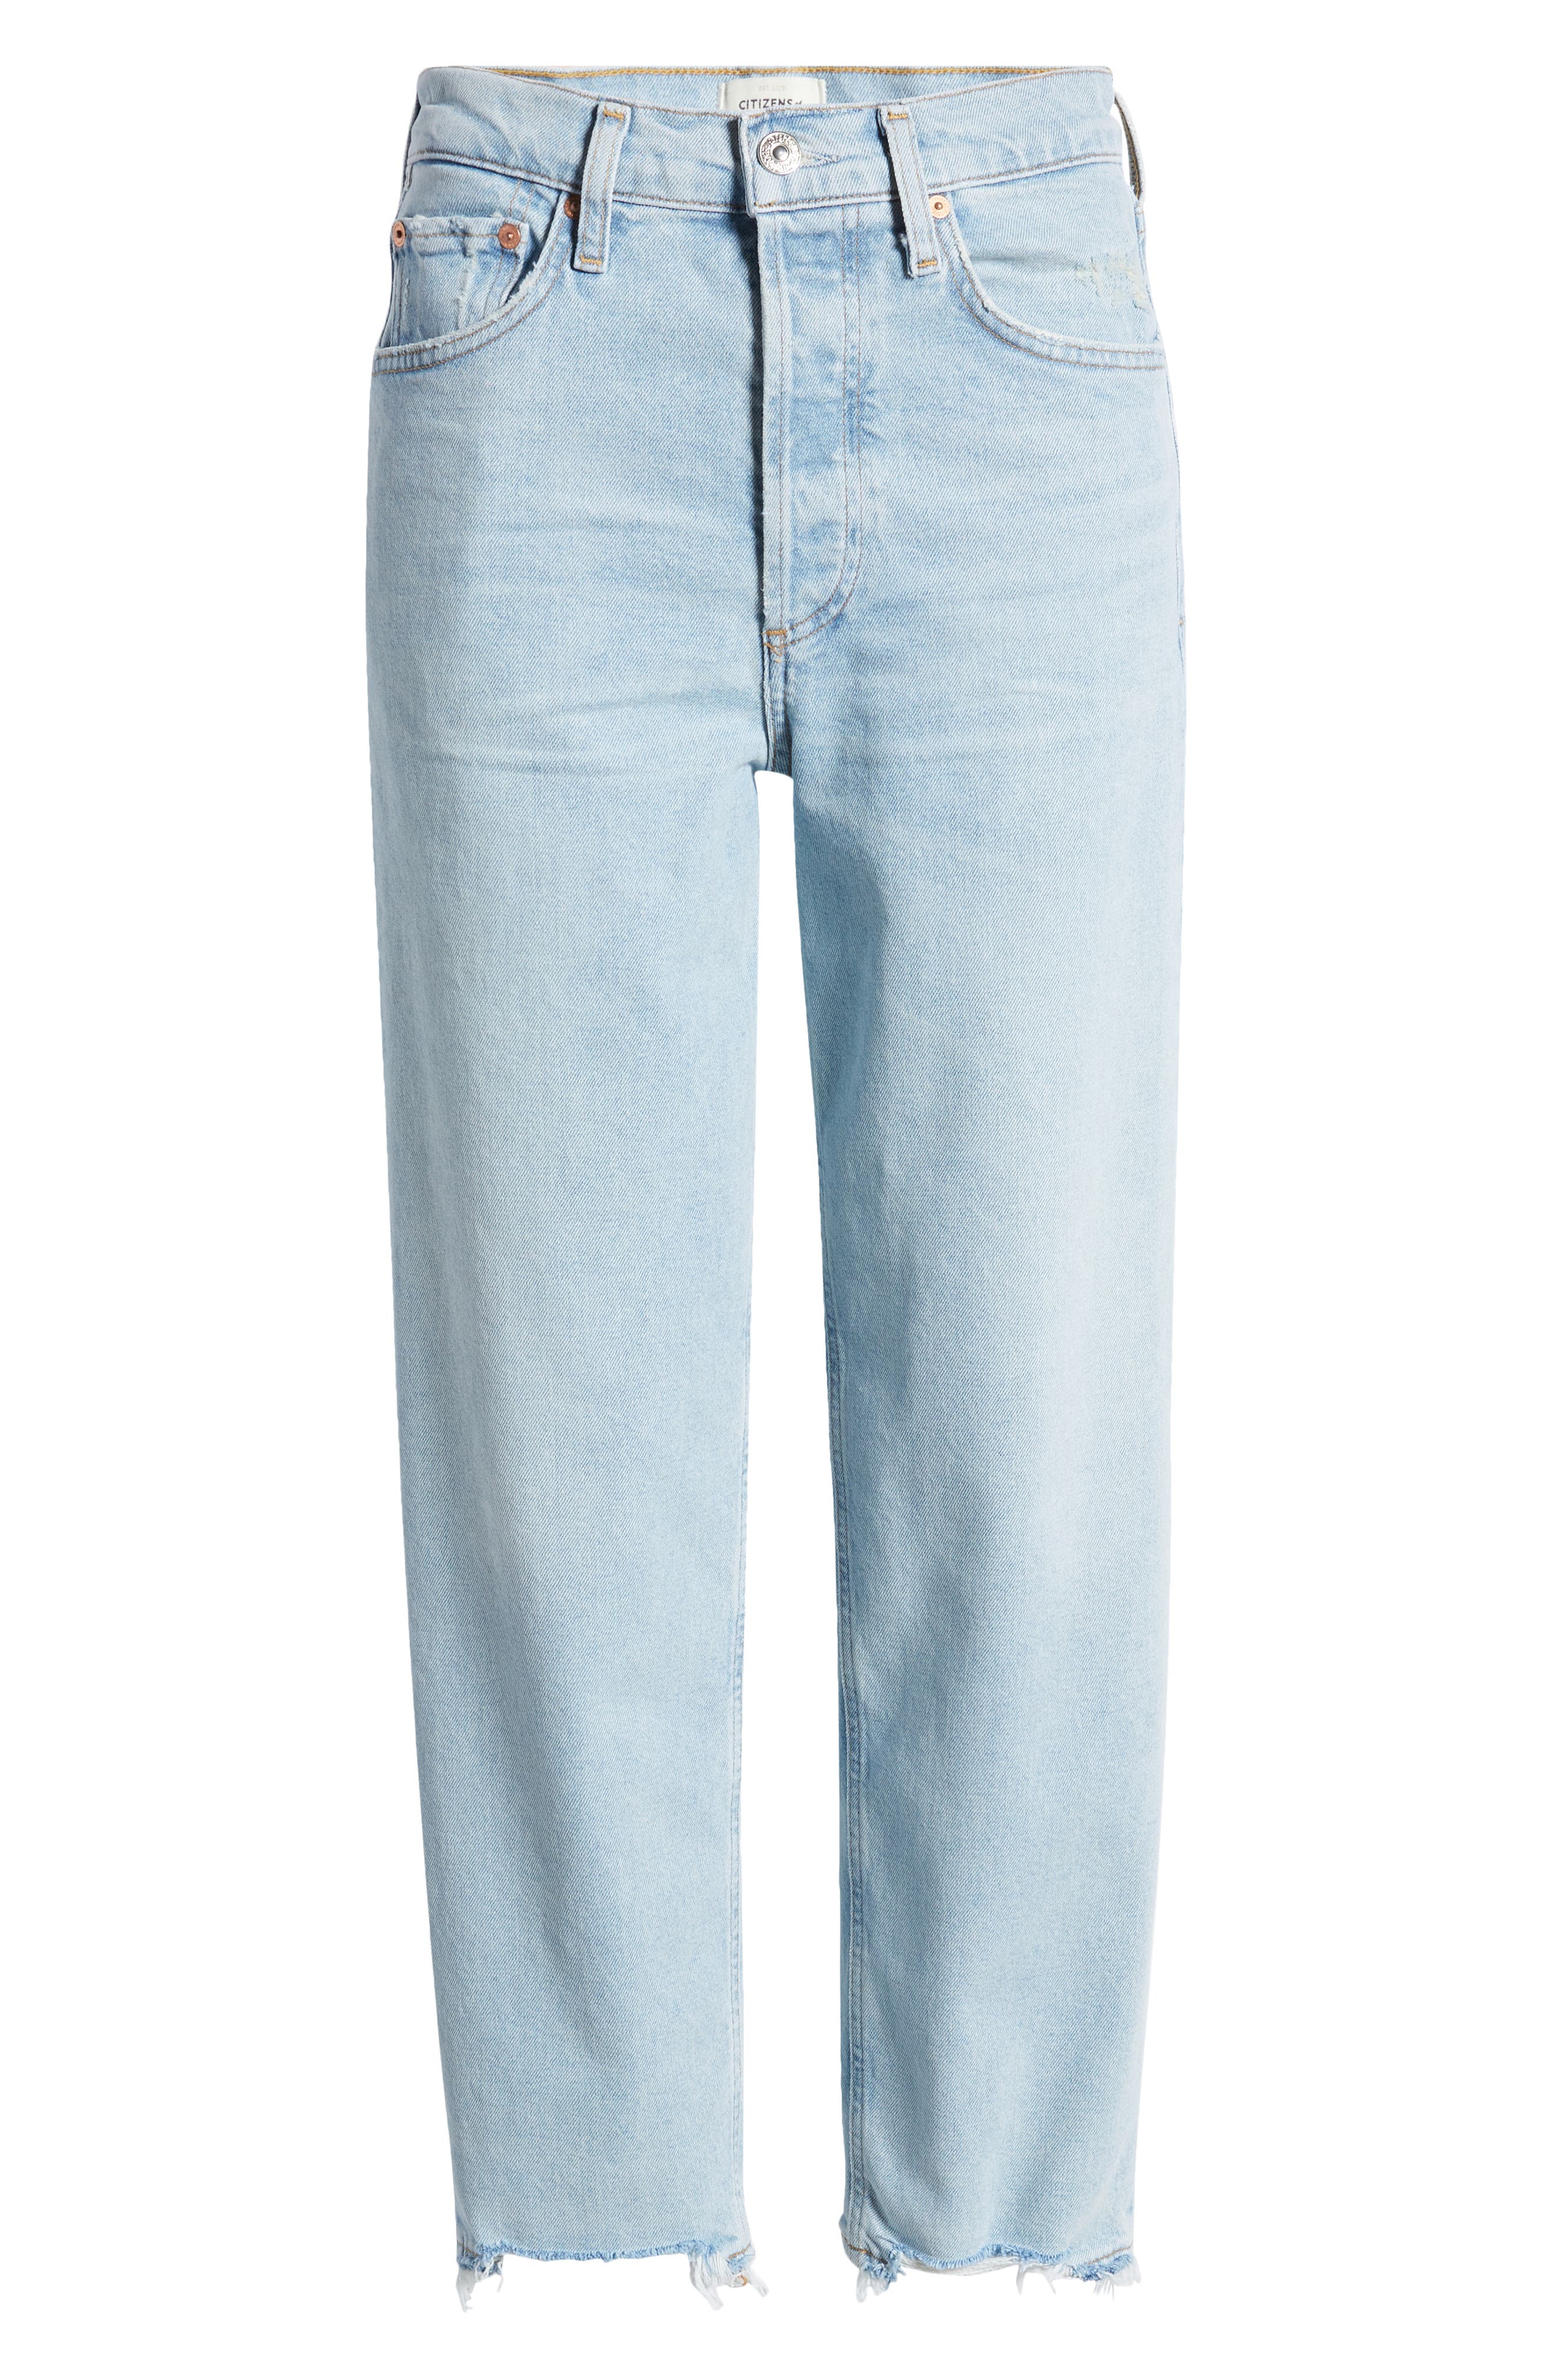 Citizens of Humanity Florence High Waist Wide Straight Leg Jeans in Sunbleach